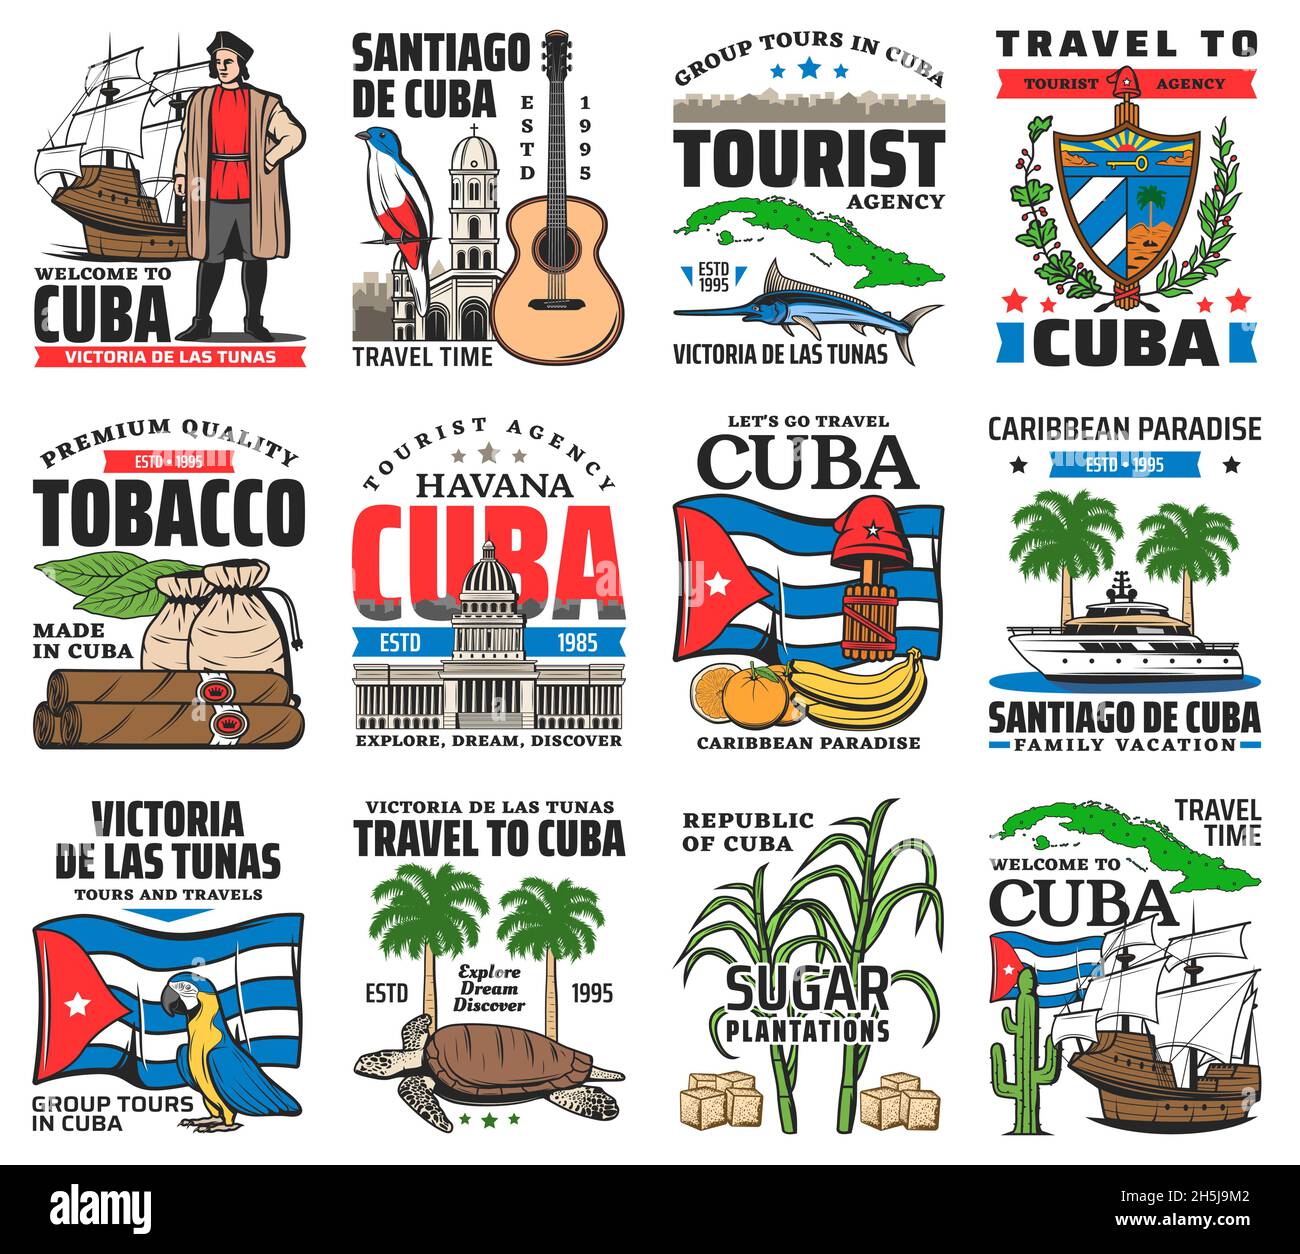 Cuba tourist attractions, havana vacation travel tours icons set. Christopher Columbus caravel, tropical birds and ocean animals, cuban architecture a Stock Vector